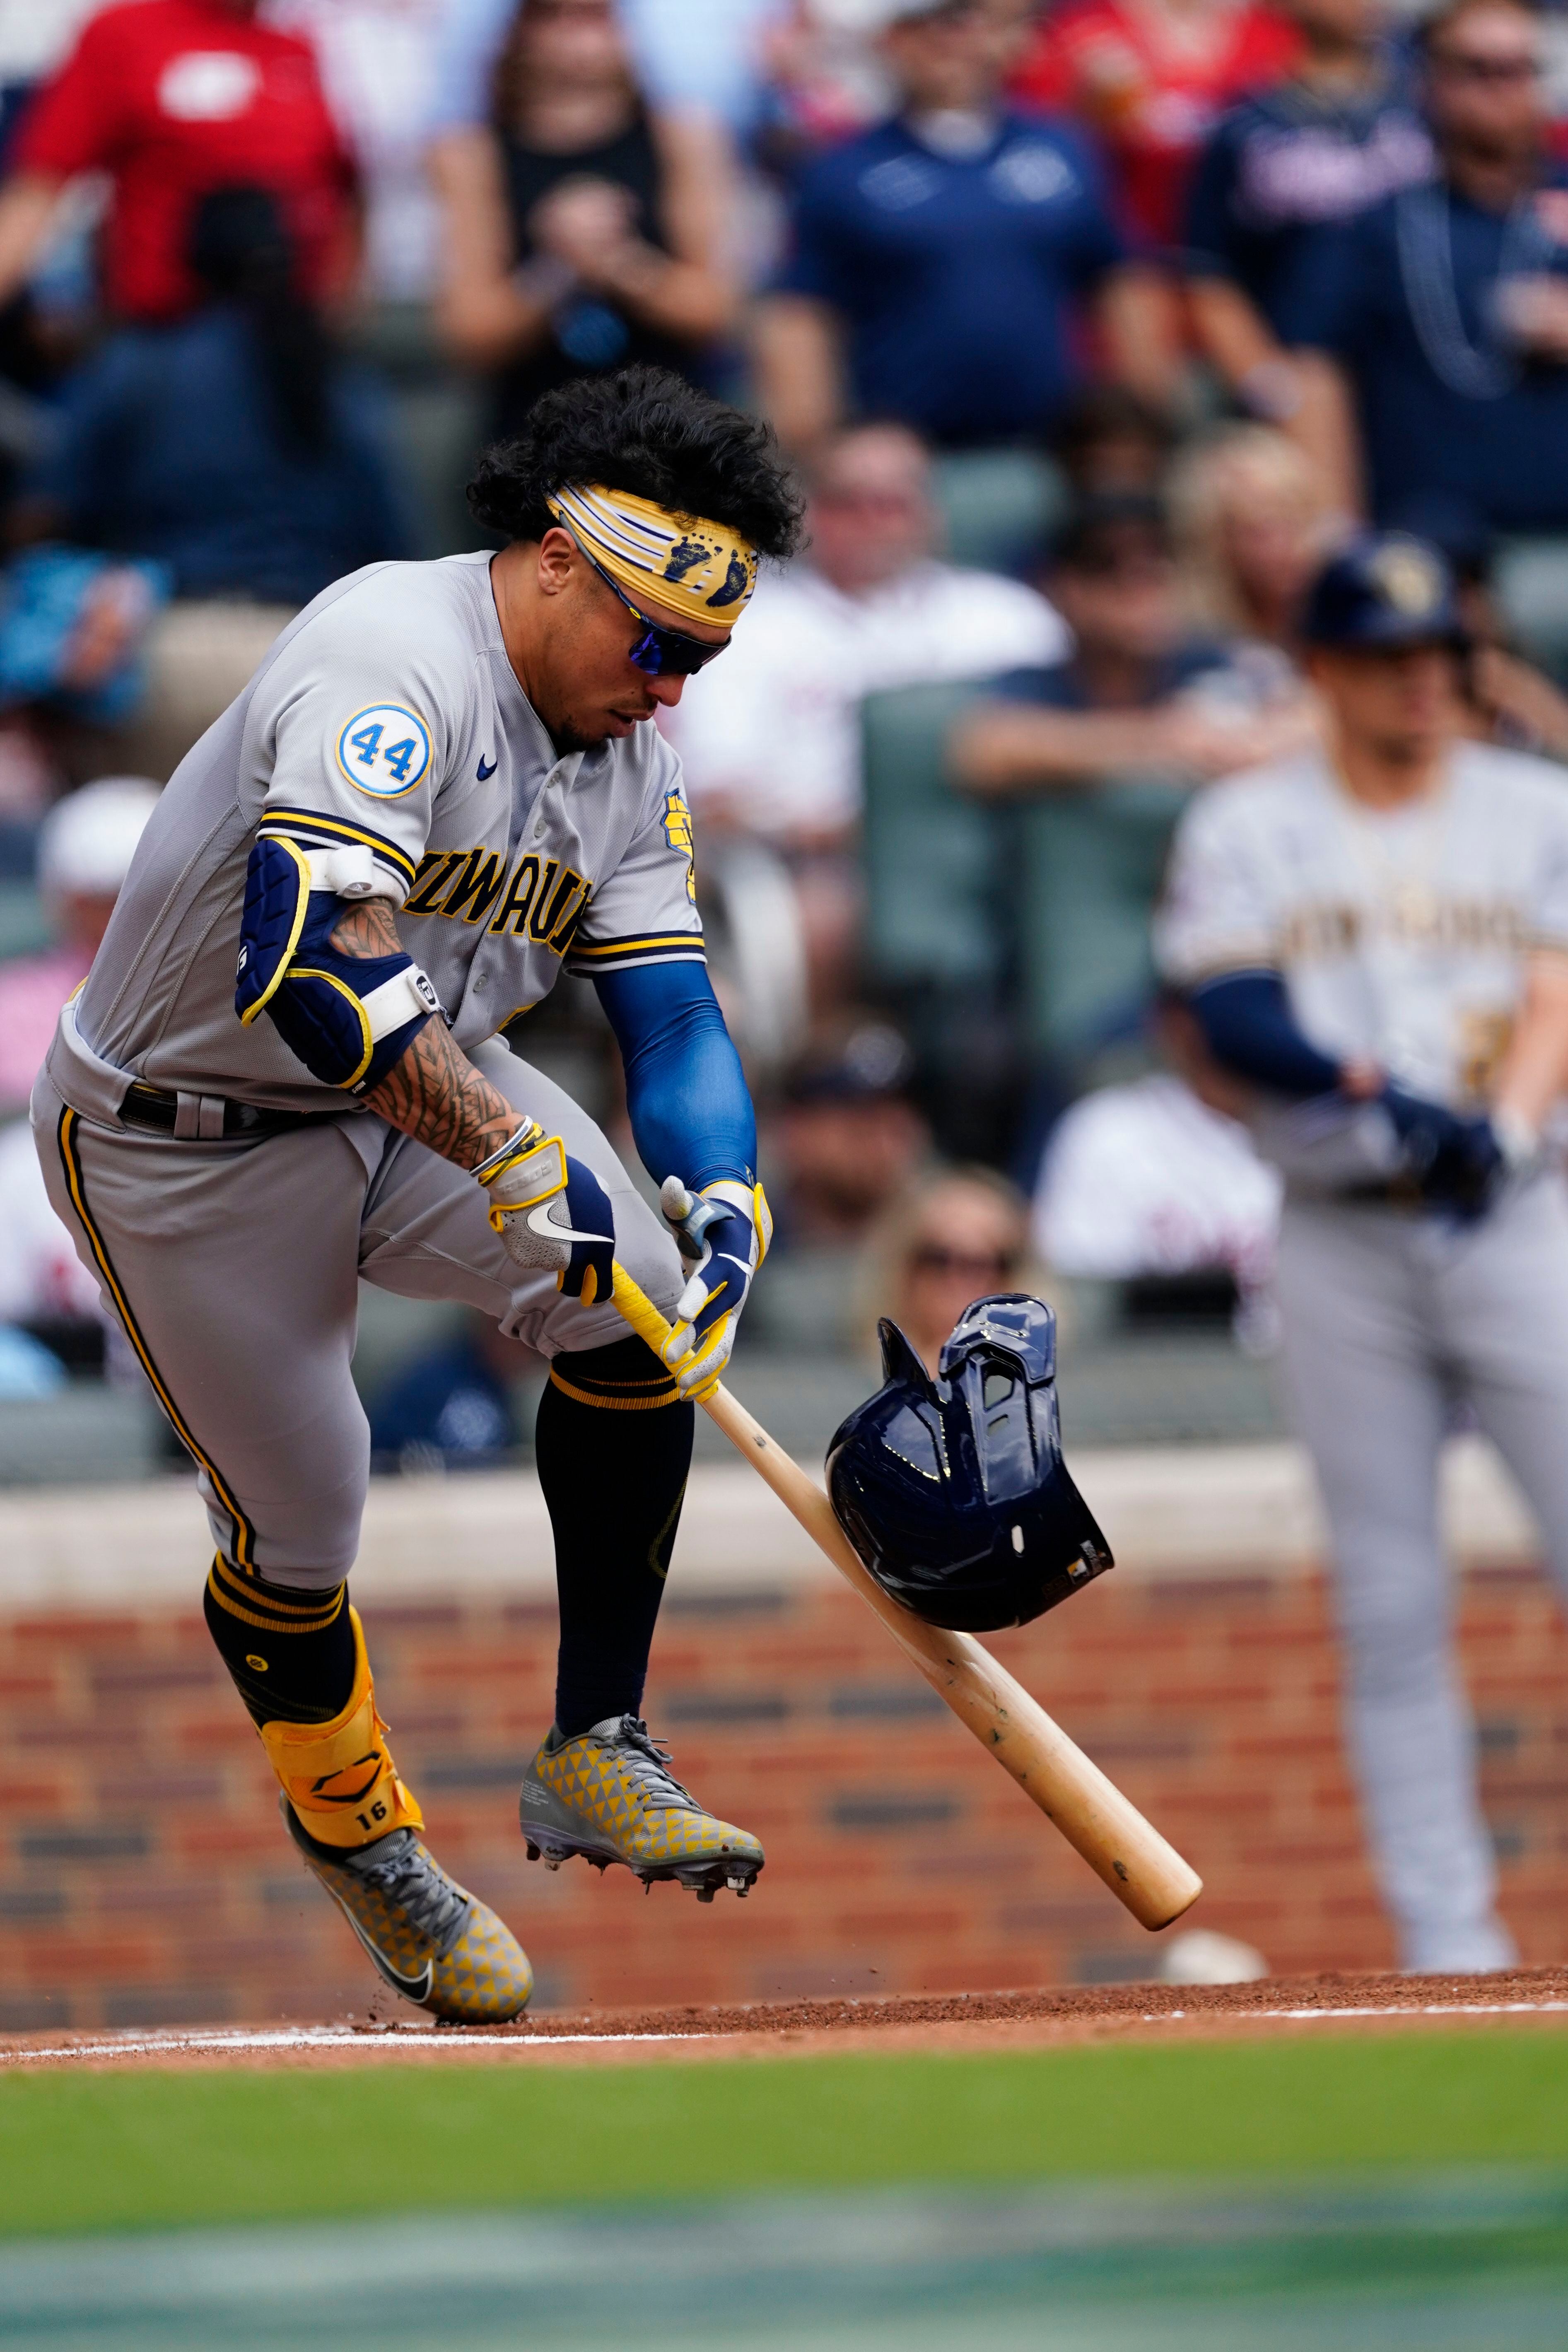 Punchless Crew: Brewers slumping at worst possible time